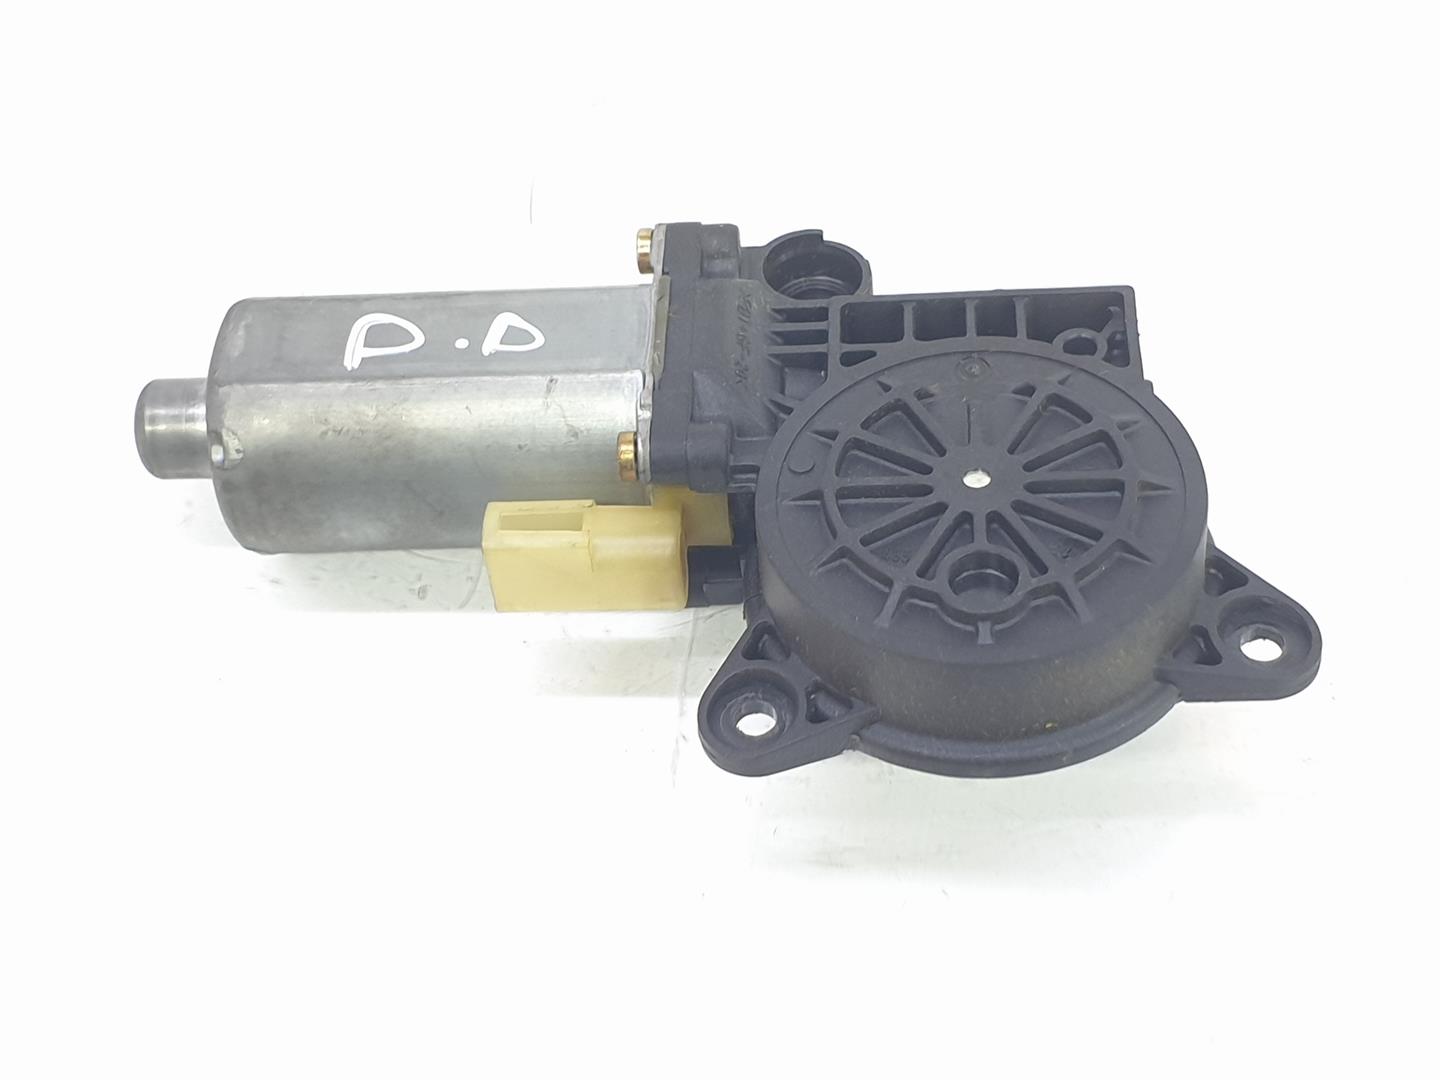 FORD Fusion 1 generation (2002-2012) Front Right Door Window Control Motor 1205750, 2S6114553AA 19922380